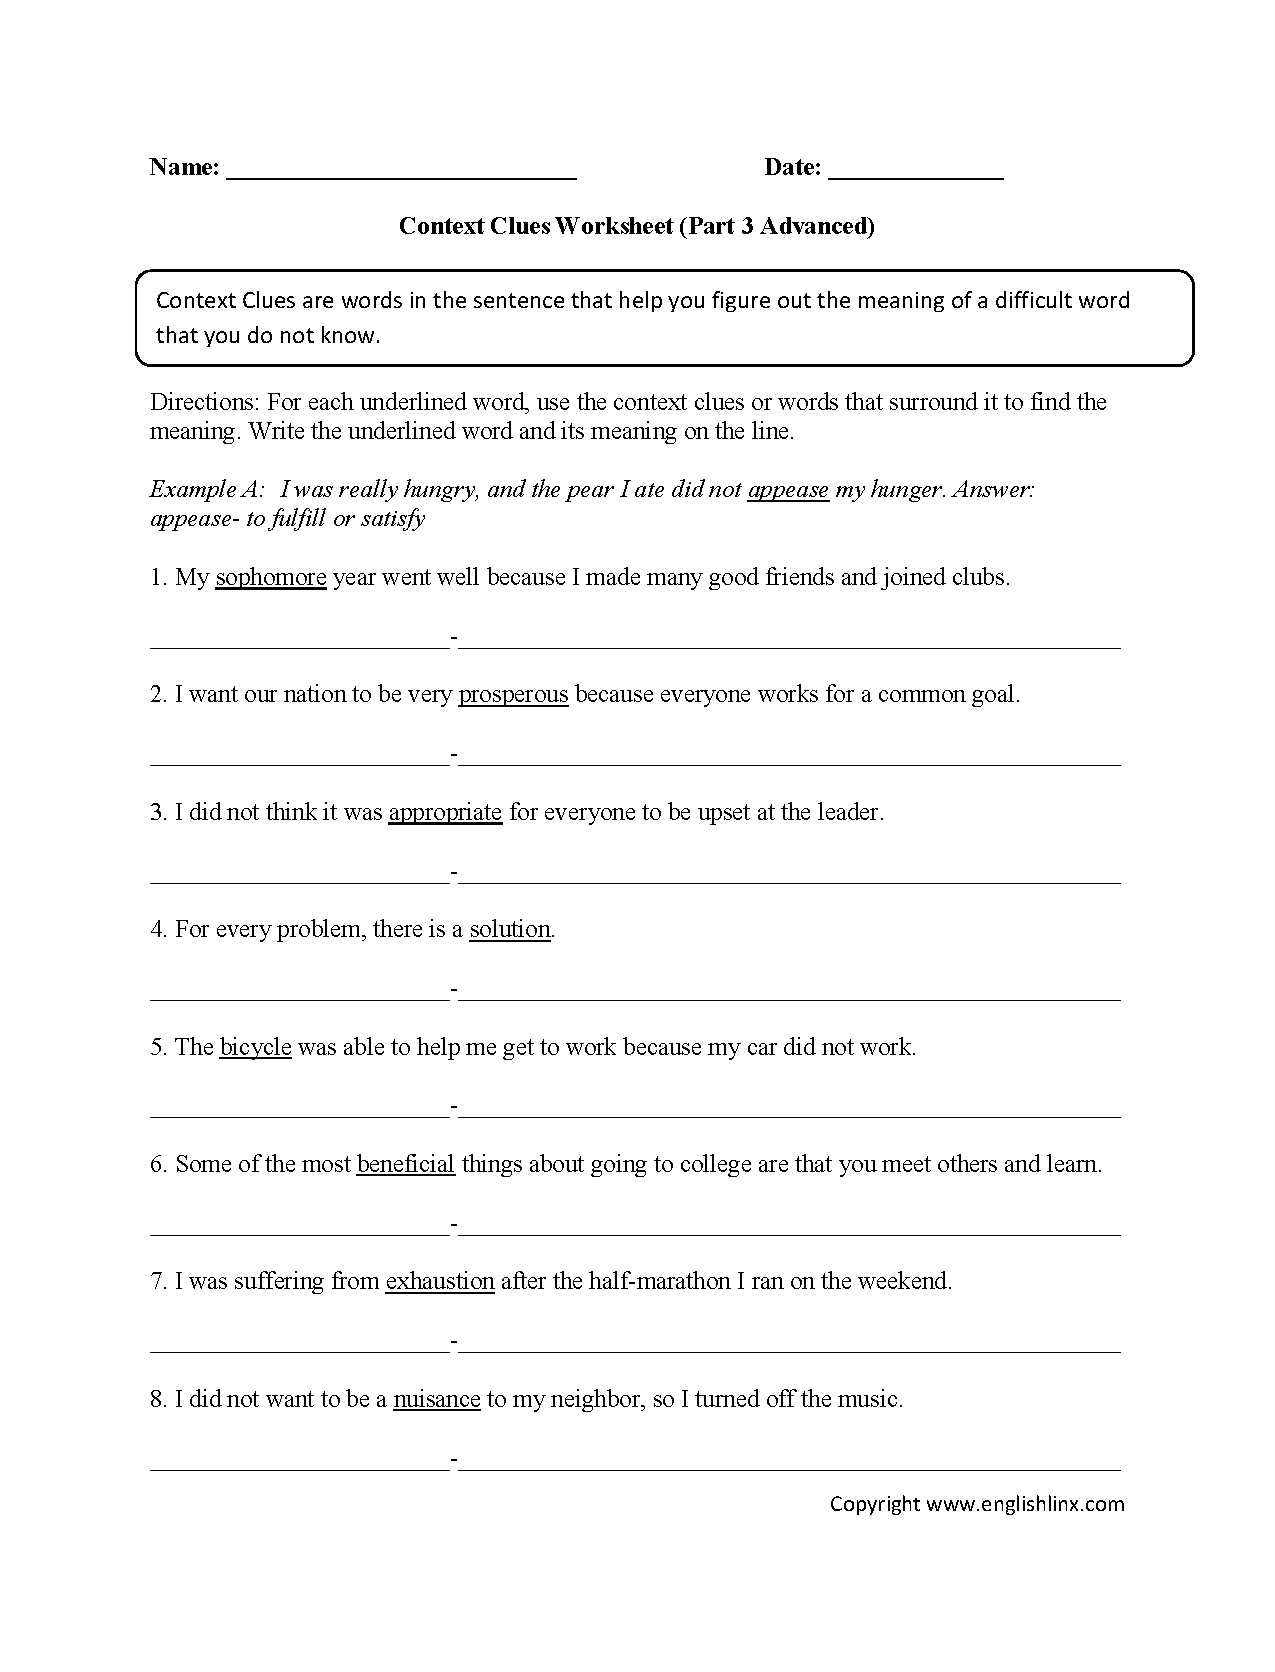 Idioms Worksheets Pdf Along with Context Clues Worksheets Advanced Part 3